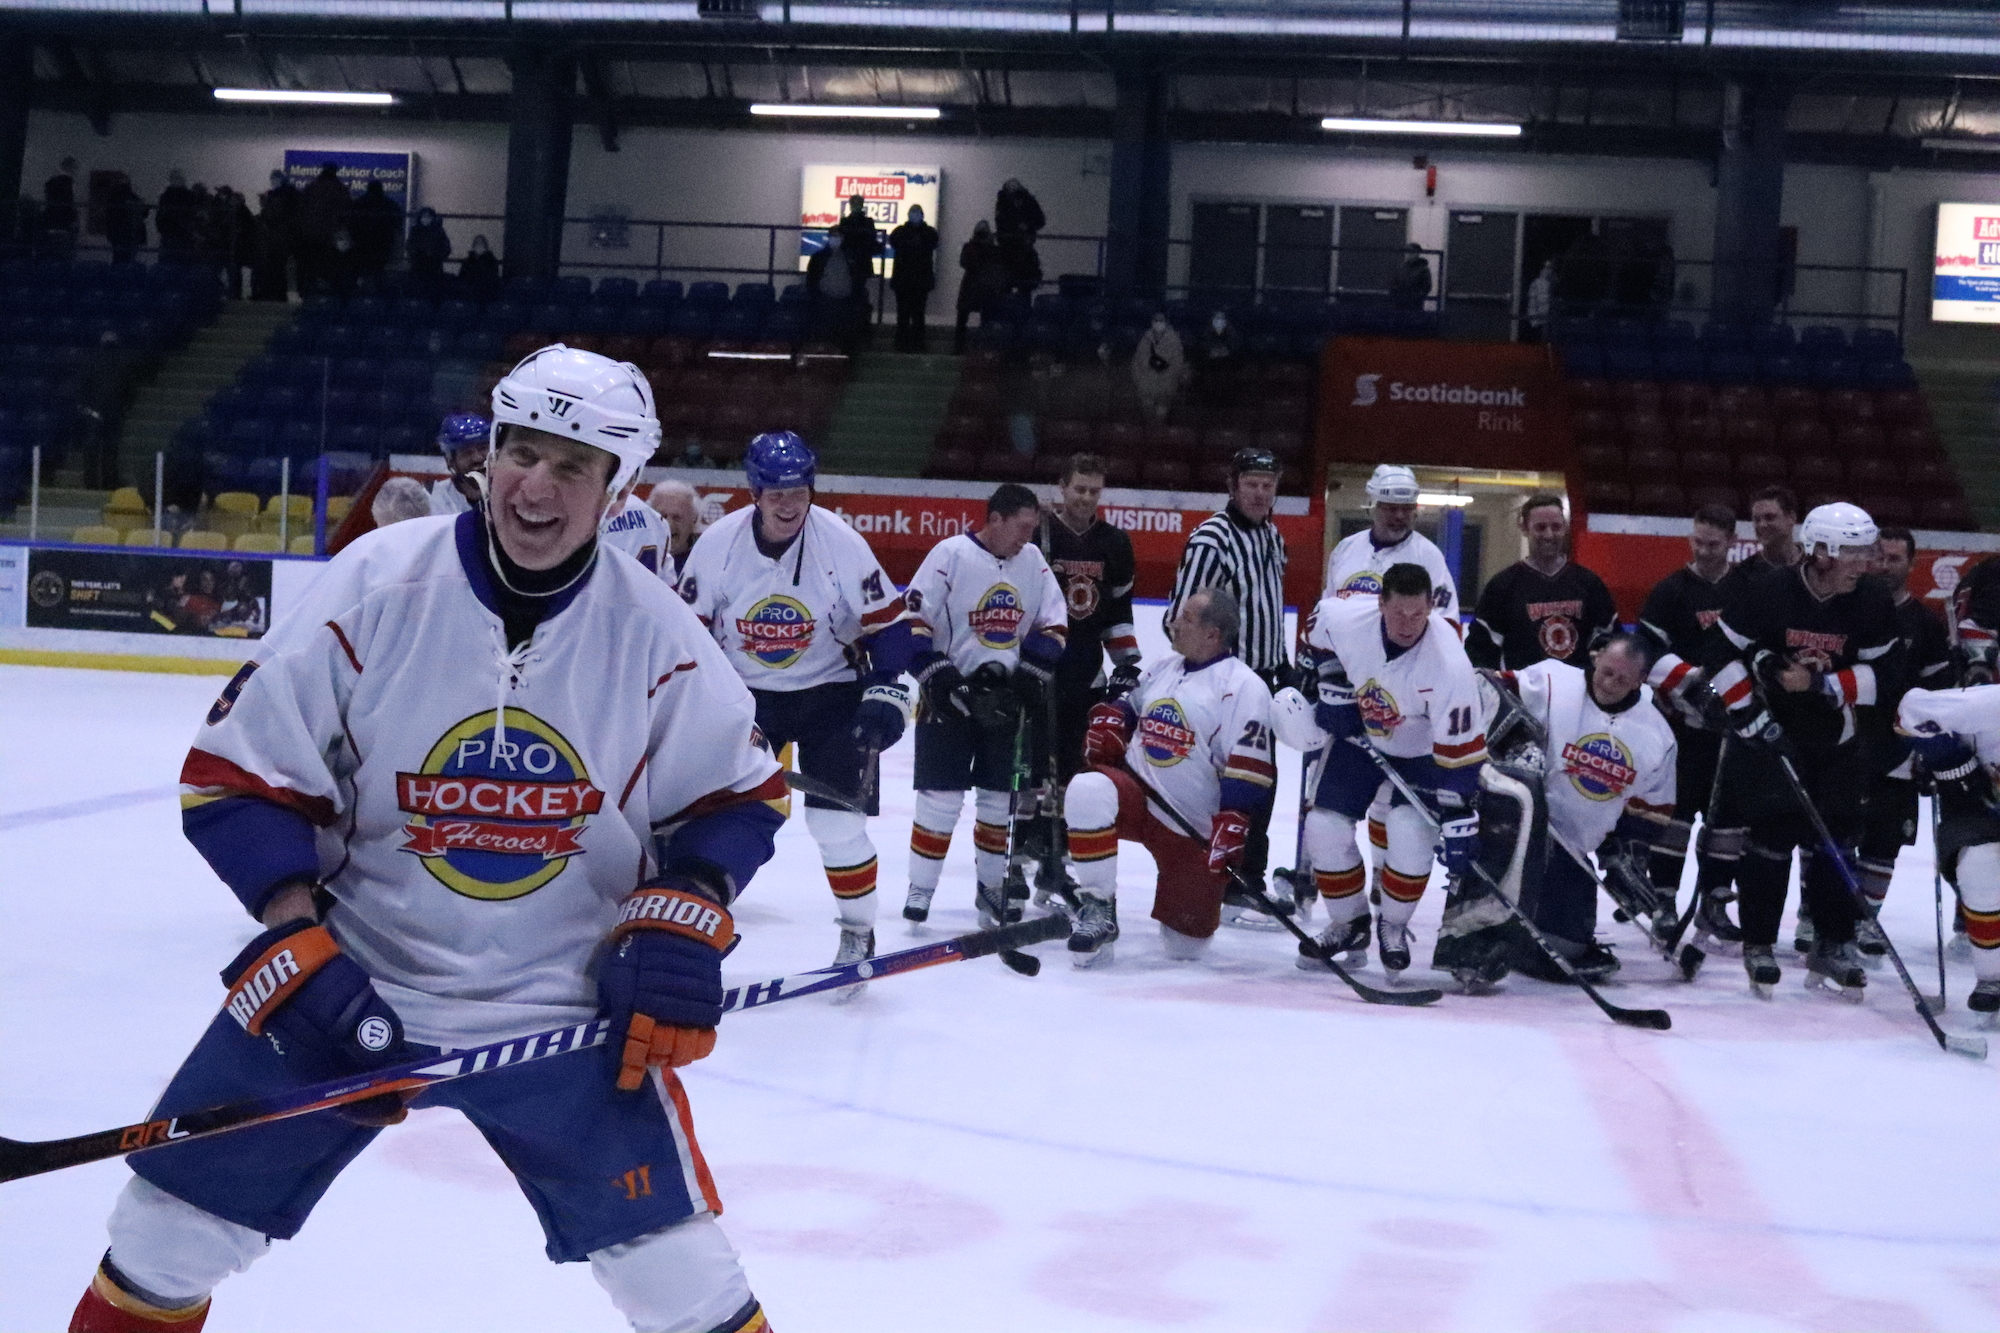 Ex-NHLers face off against Guelph firefighters for charity - Guelph News